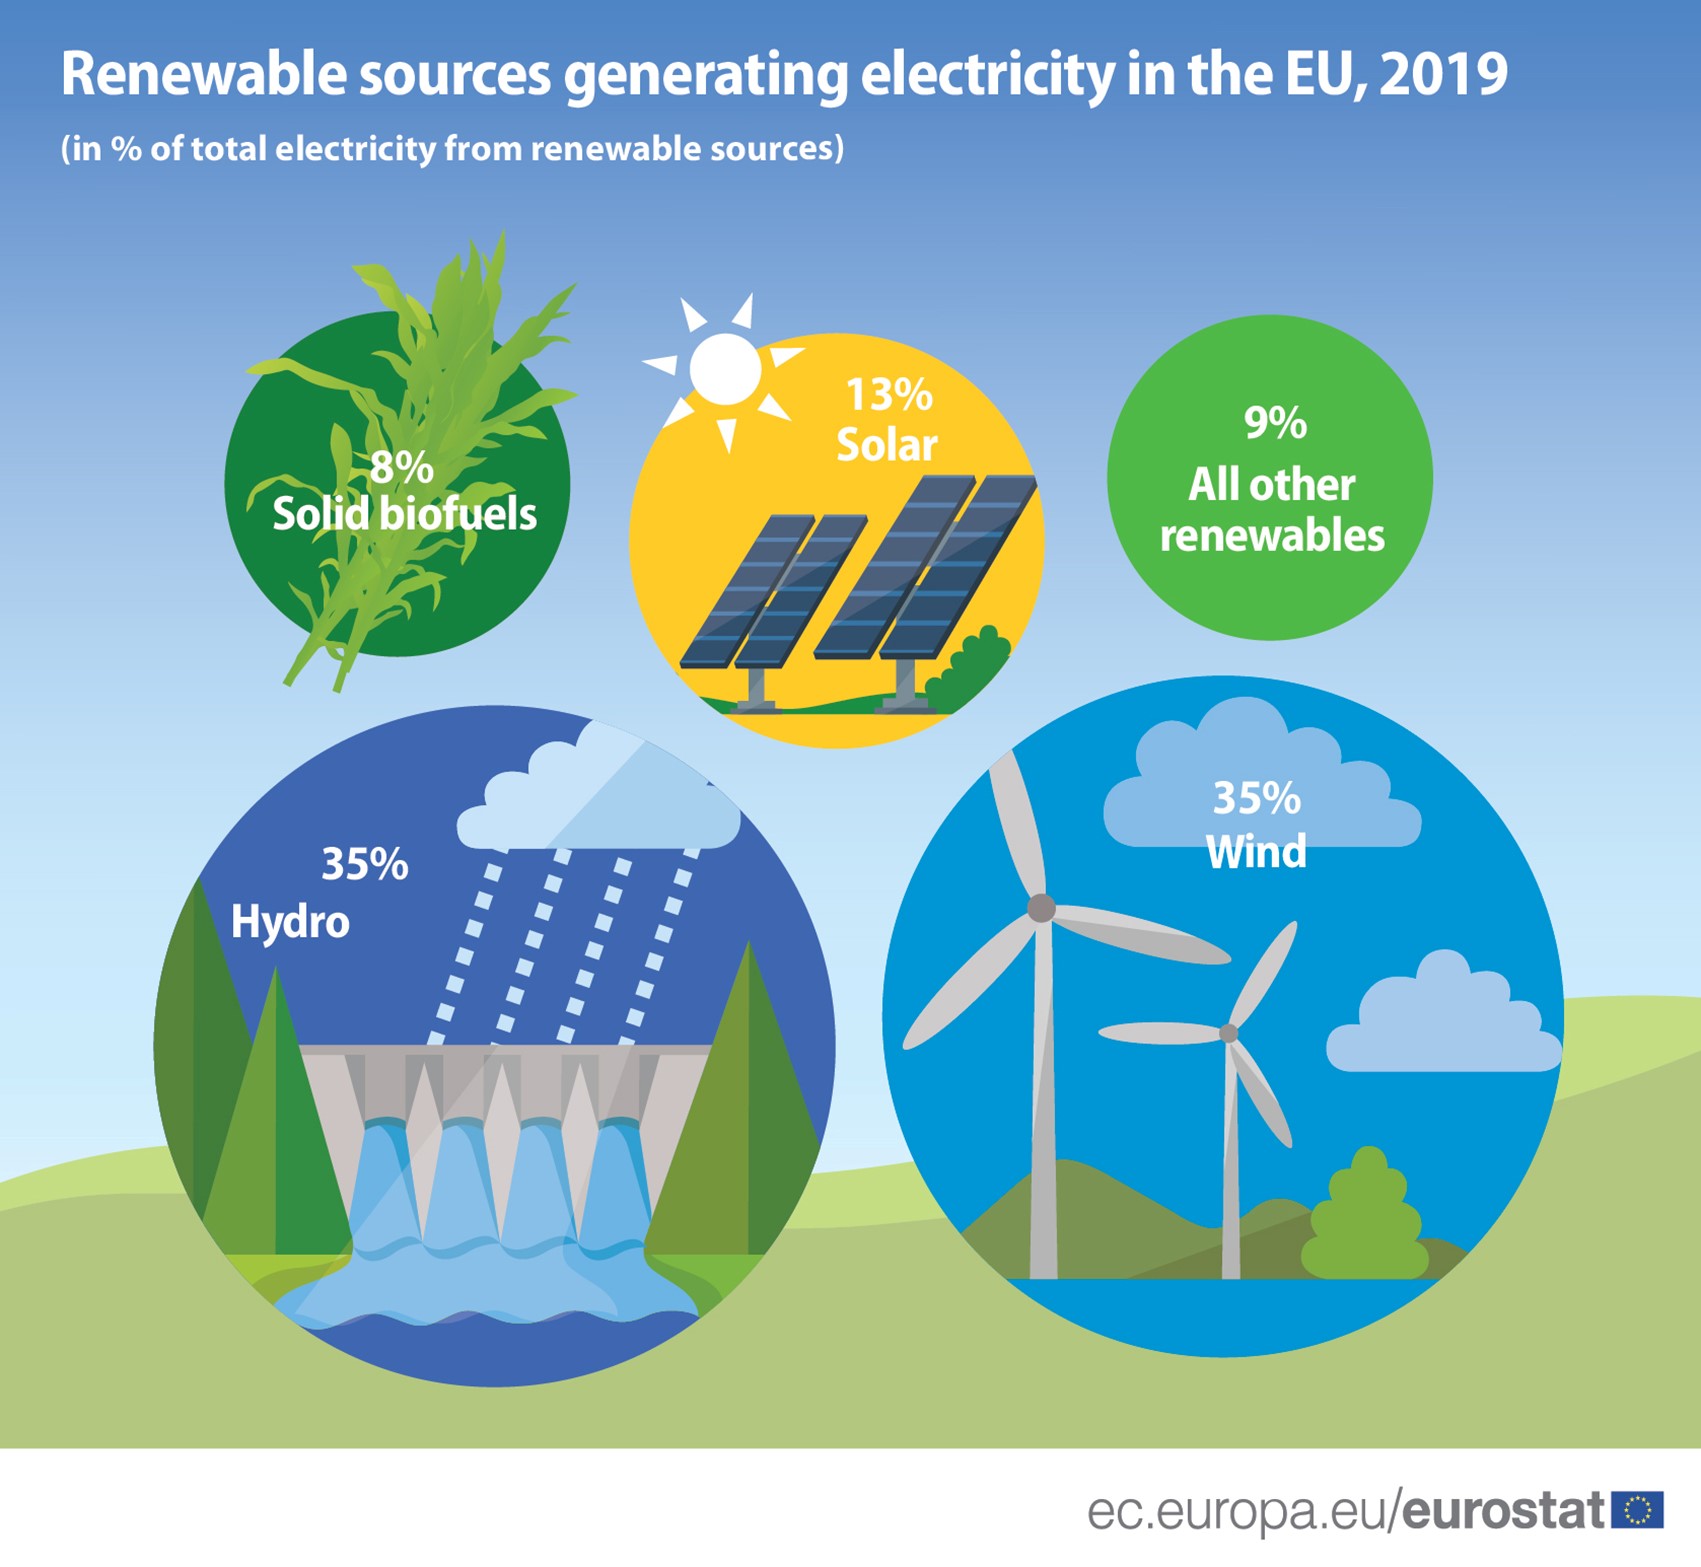 wind-and-water-provide-most-renewable-electricity-products-eurostat